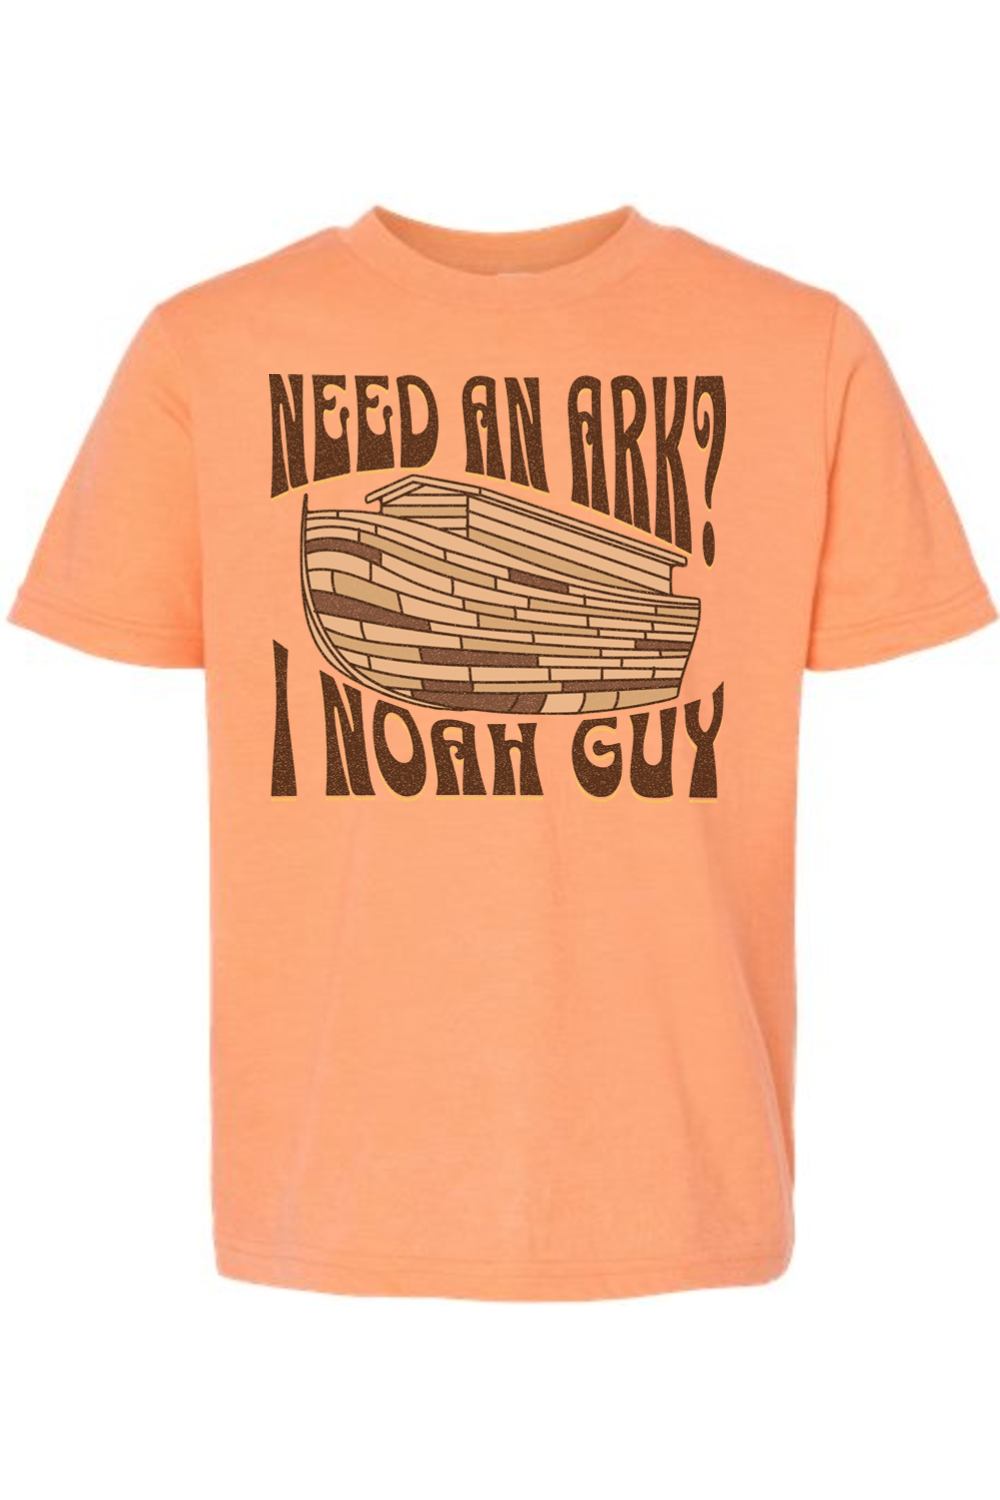 Need an Ark? I Know a Guy - Kids T-Shirt